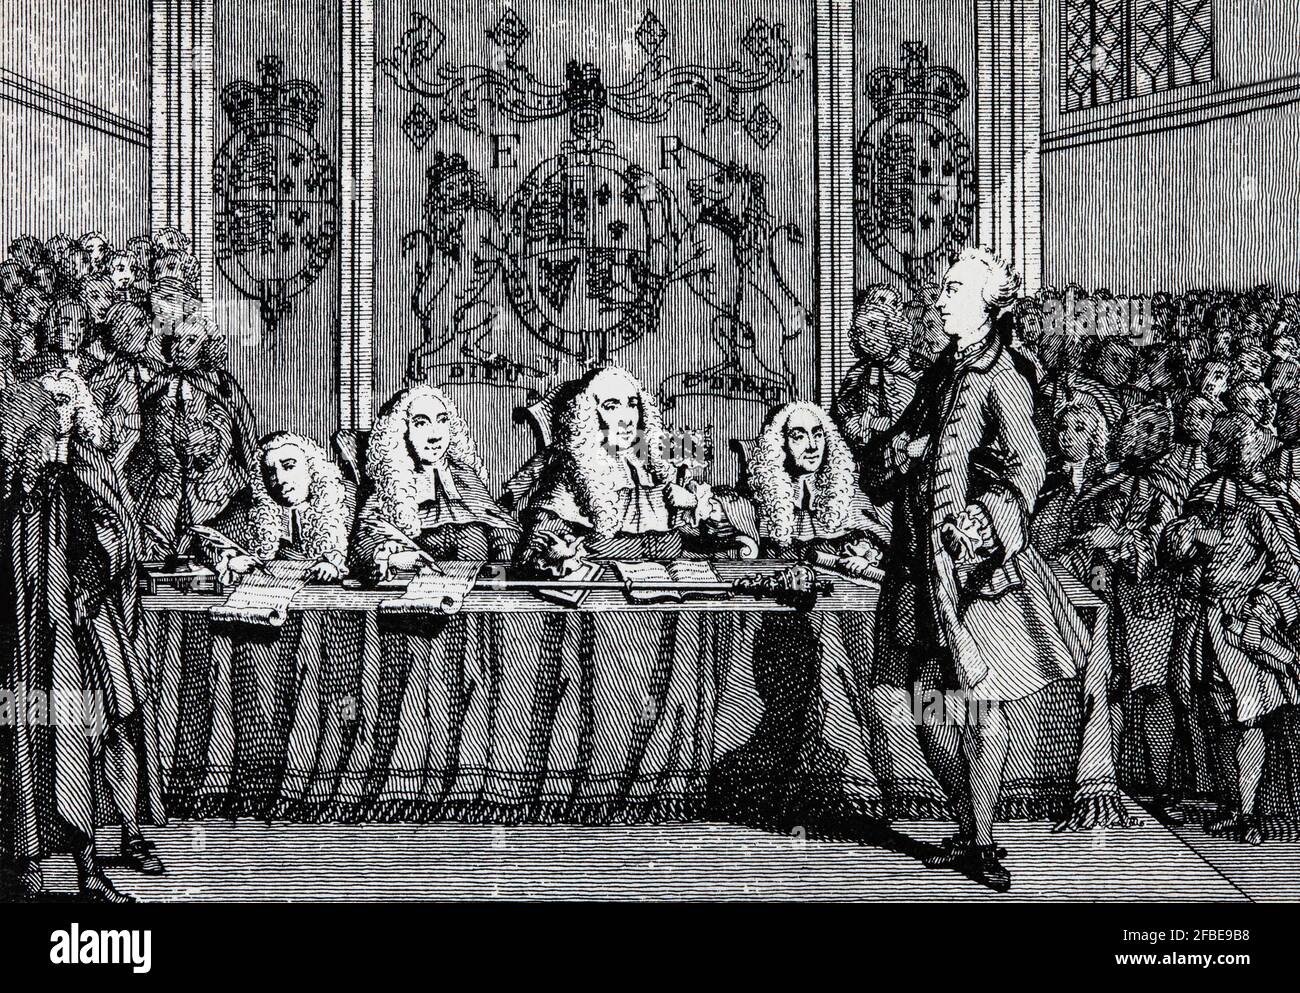 John Wilkes (1725-1797), a British radical journalist and politician, as well as a magistrate, essayist and soldier while on trial before the King's Bench. He was elected a Member of Parliament for Middlesex in 1757, fighting for the right of his voters, rather than the House of Commons, to determine their representatives.   In 1776, he introduced the first bill for parliamentary reform in the British Parliament. Stock Photo